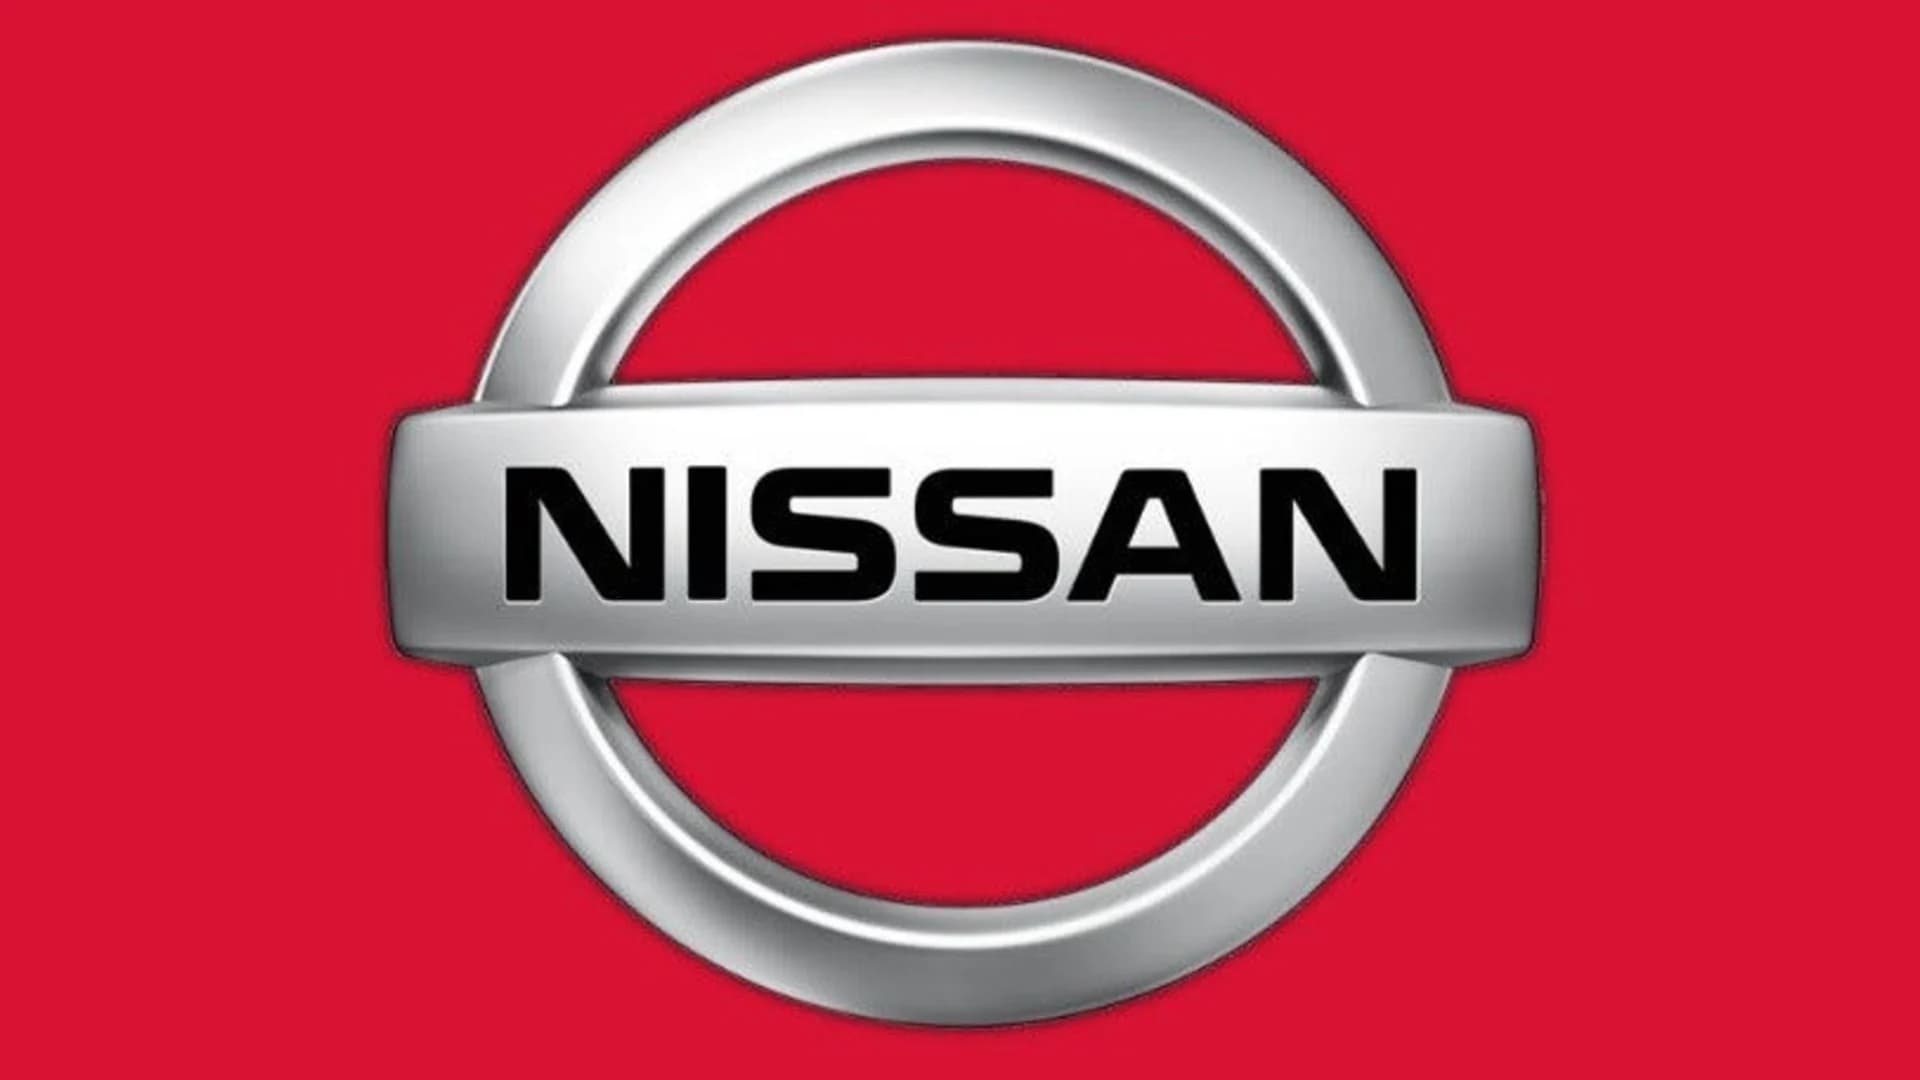 Fire danger causes Nissan to recall over 450,000 vehicles